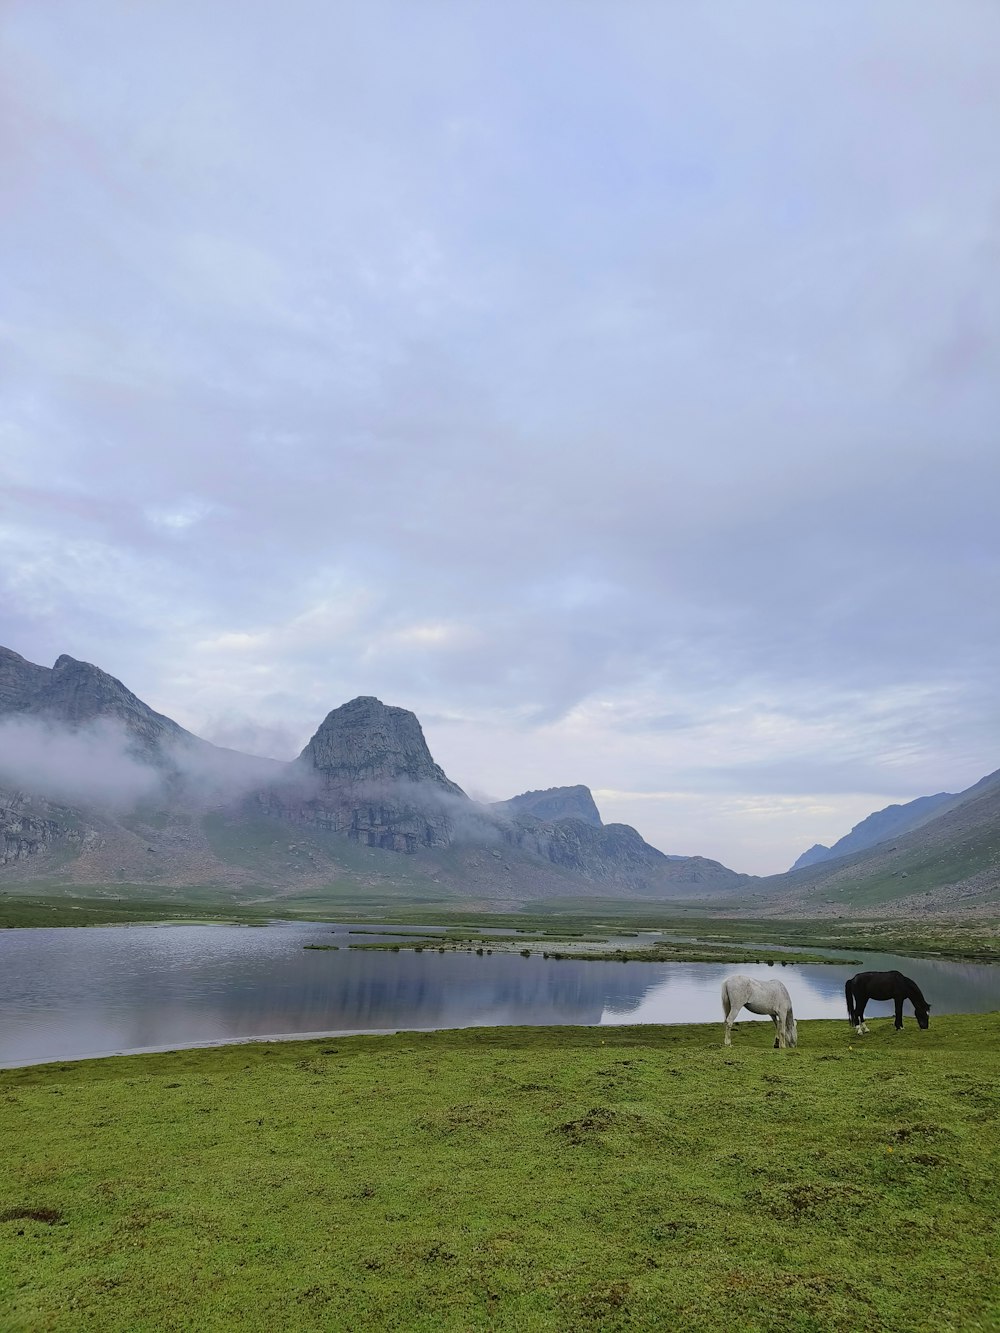 two horses grazing in a field next to a lake